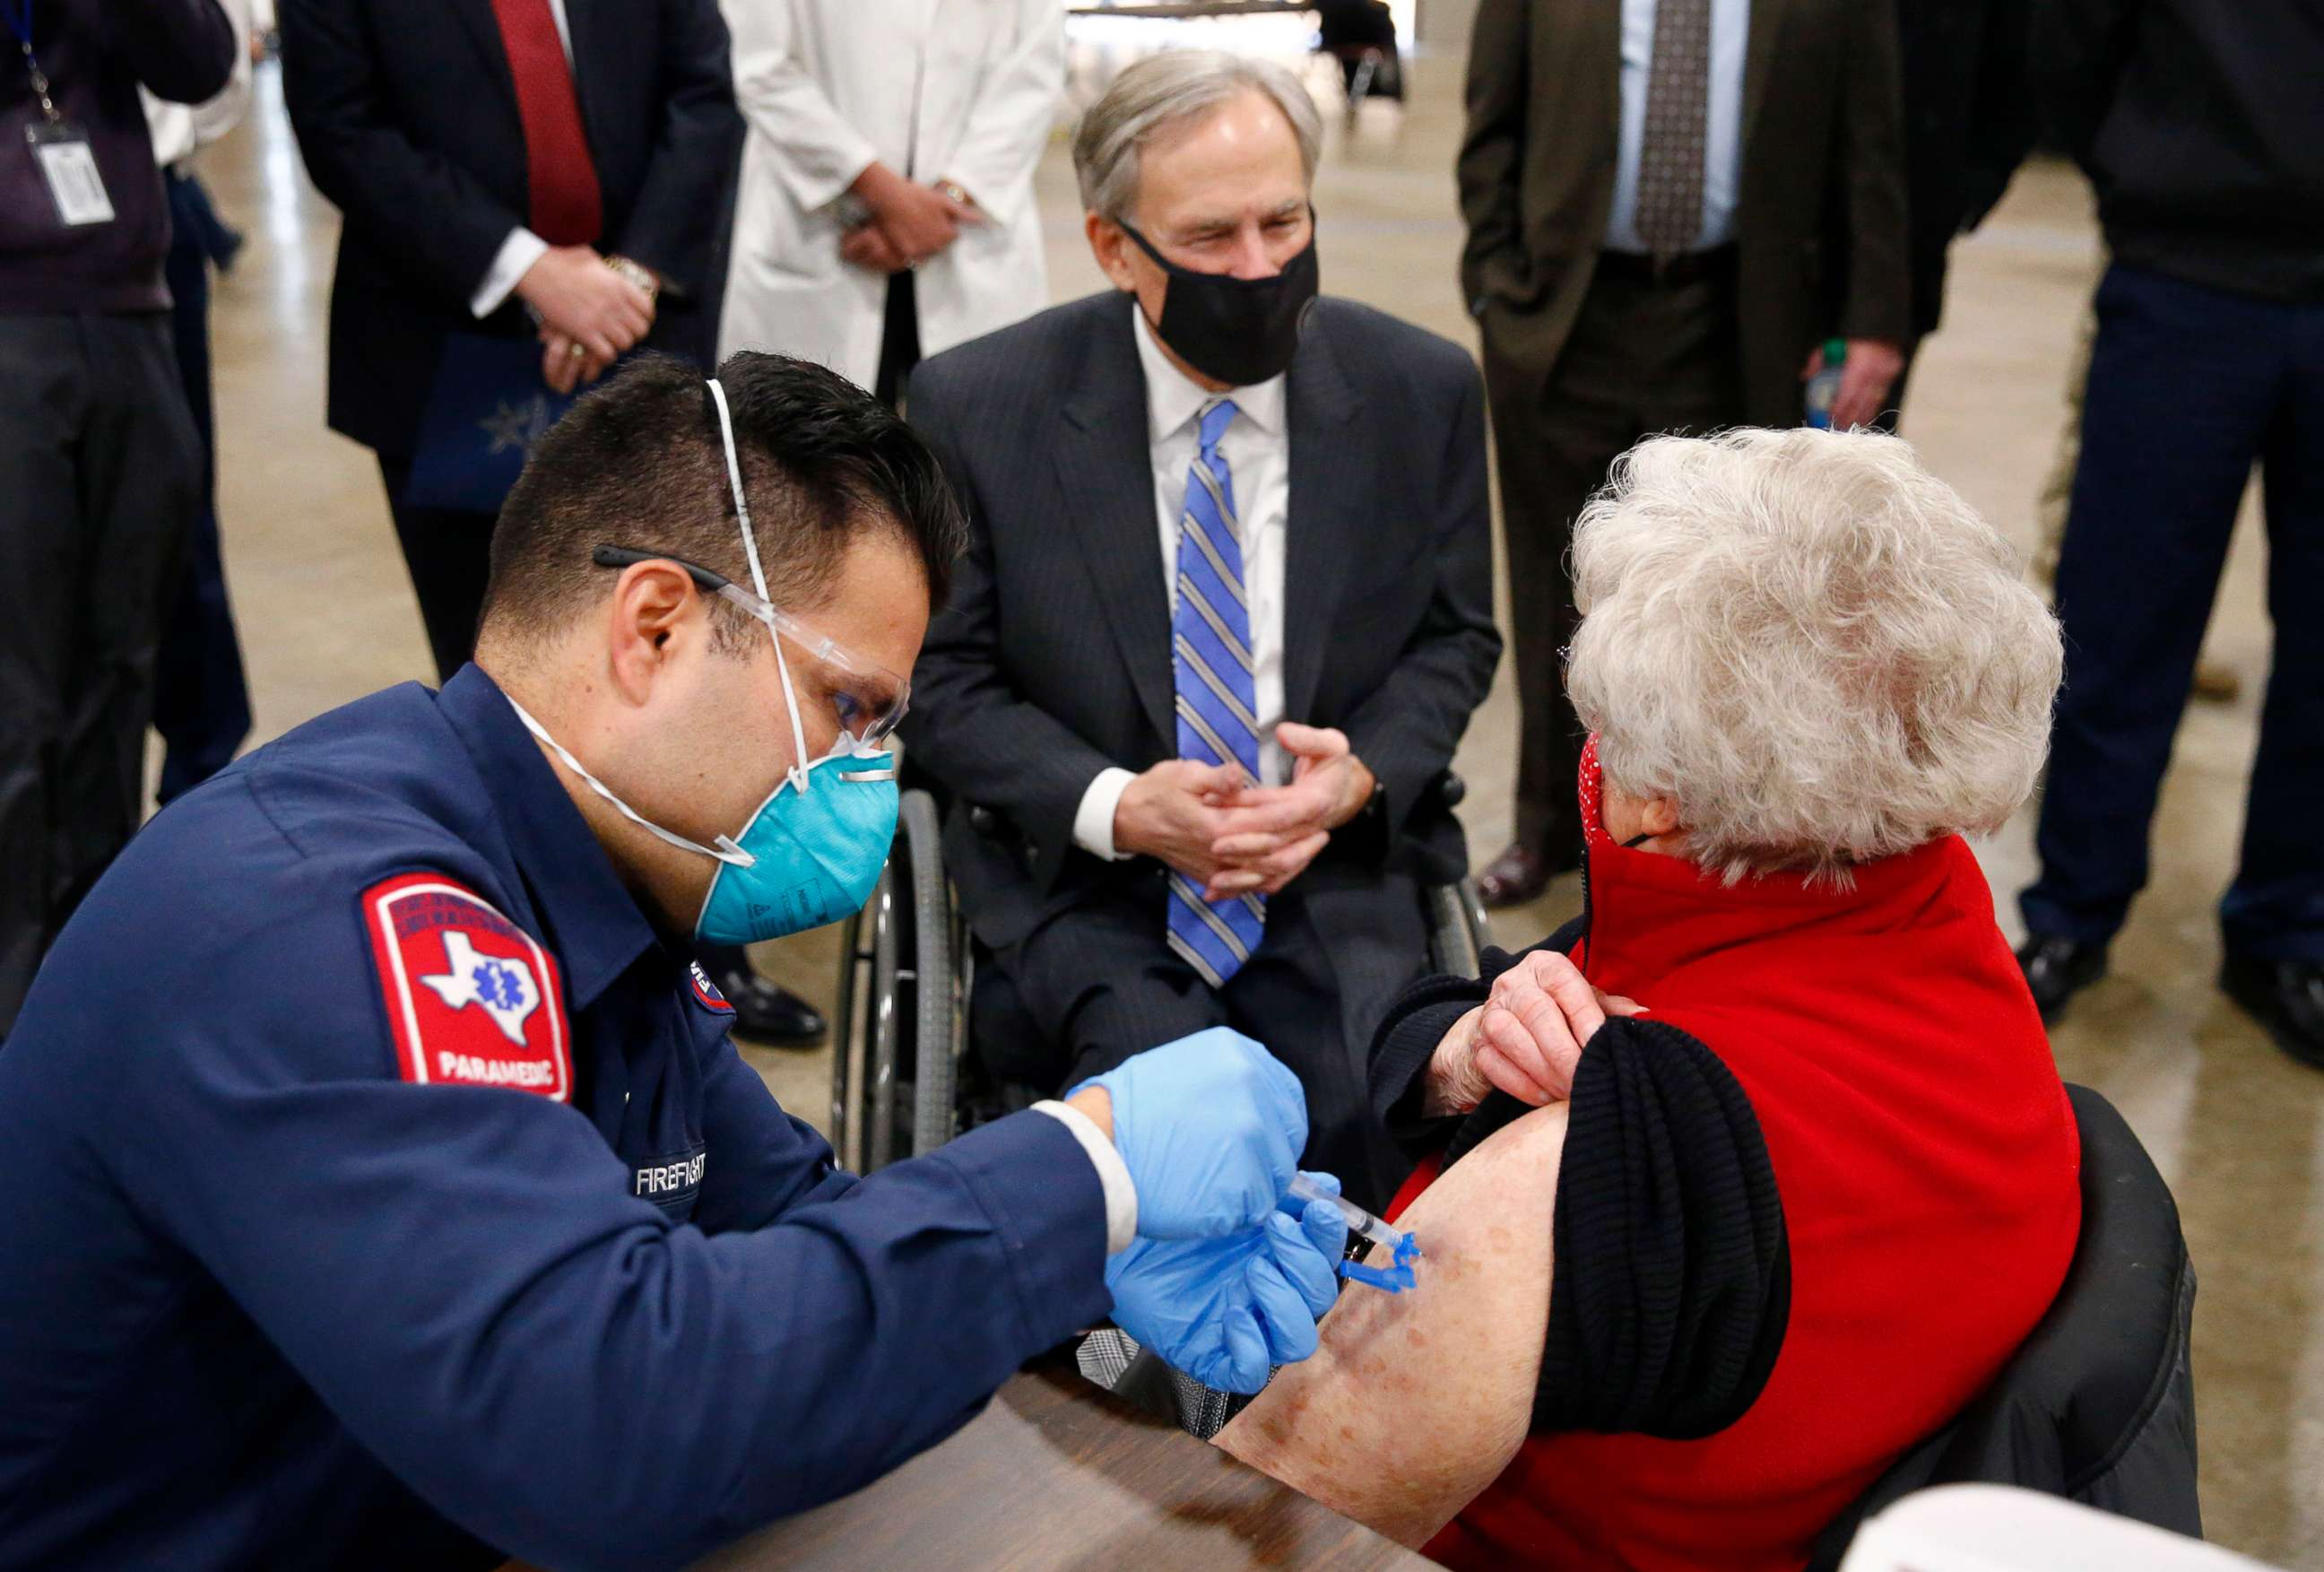 PHOTO: A COVID-19 shot is administed at a mass vaccination site inside the Esports Stadium Arlington & Expo Center in Arlington, Texas, Jan. 11, 2021.